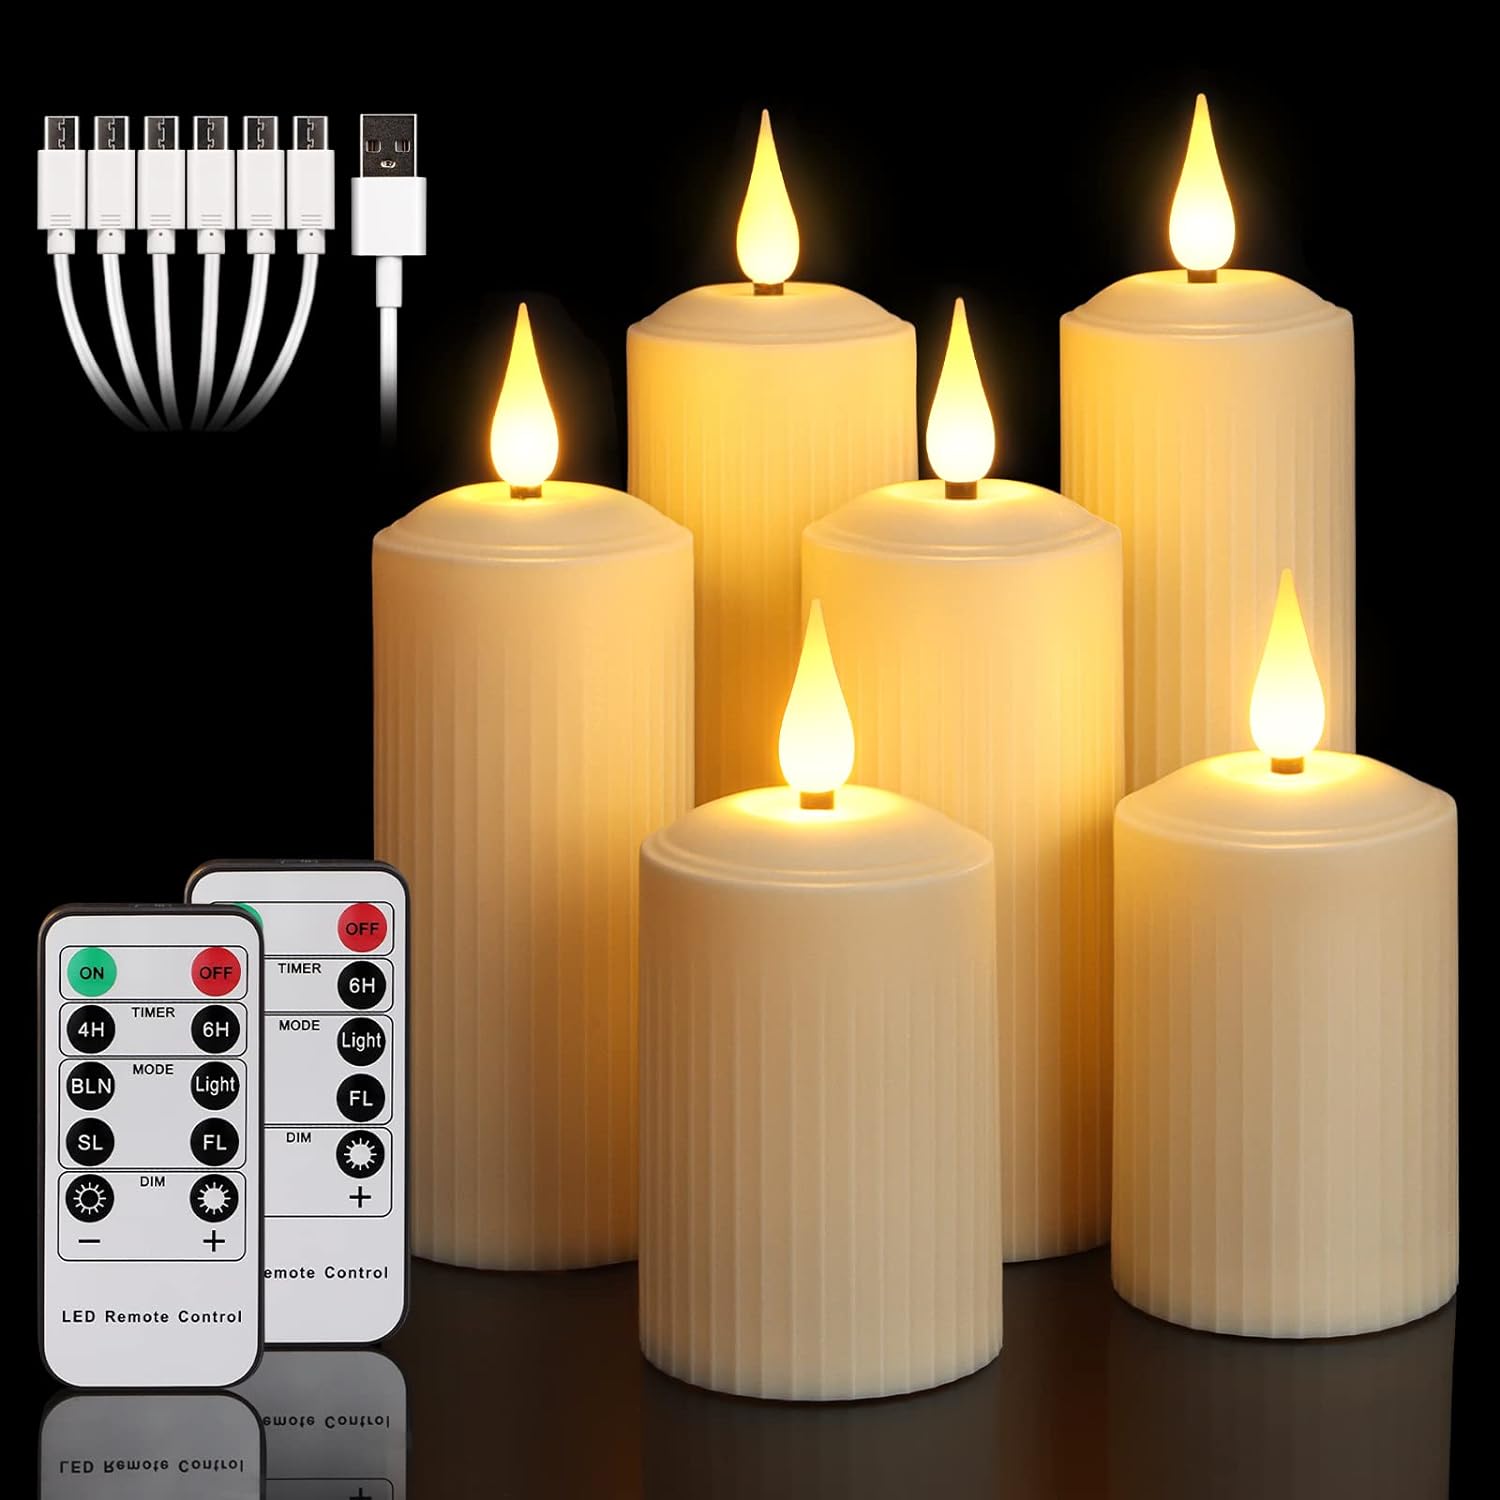 yunsheng Rechargeable LED Candles with 10 Button Remote Control, Outdoor Waterproof Flameless Candles with 6/8 Hour Timer, Roman Pillar Candle in Set of 6 (5 x 10.5/14/16.5 cm), Ivory, Type-C